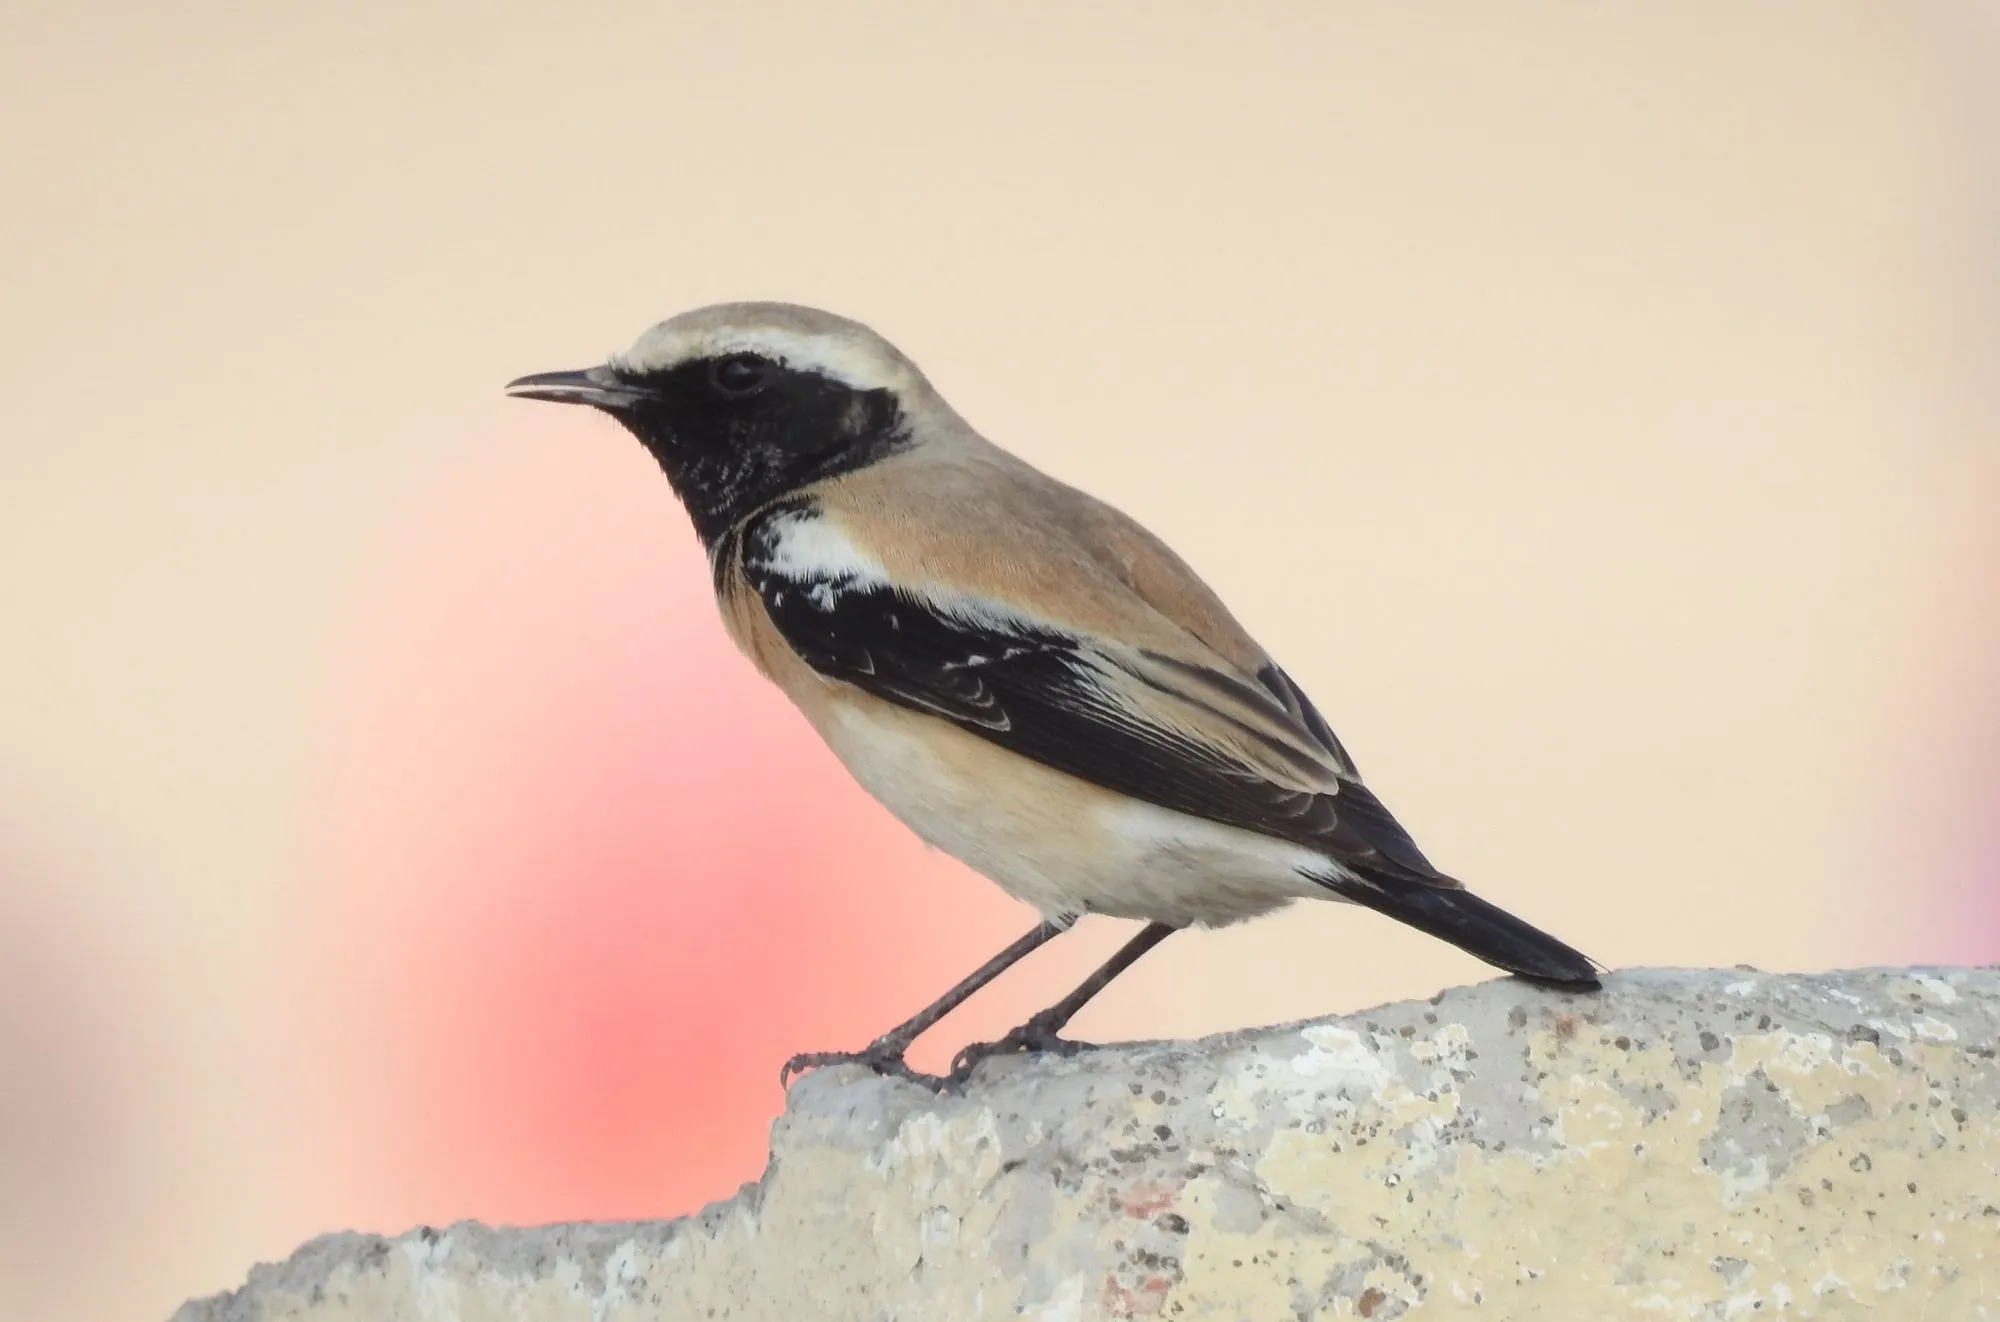 Desert wheatears have a wingspan of 10.2 in (26 cm).